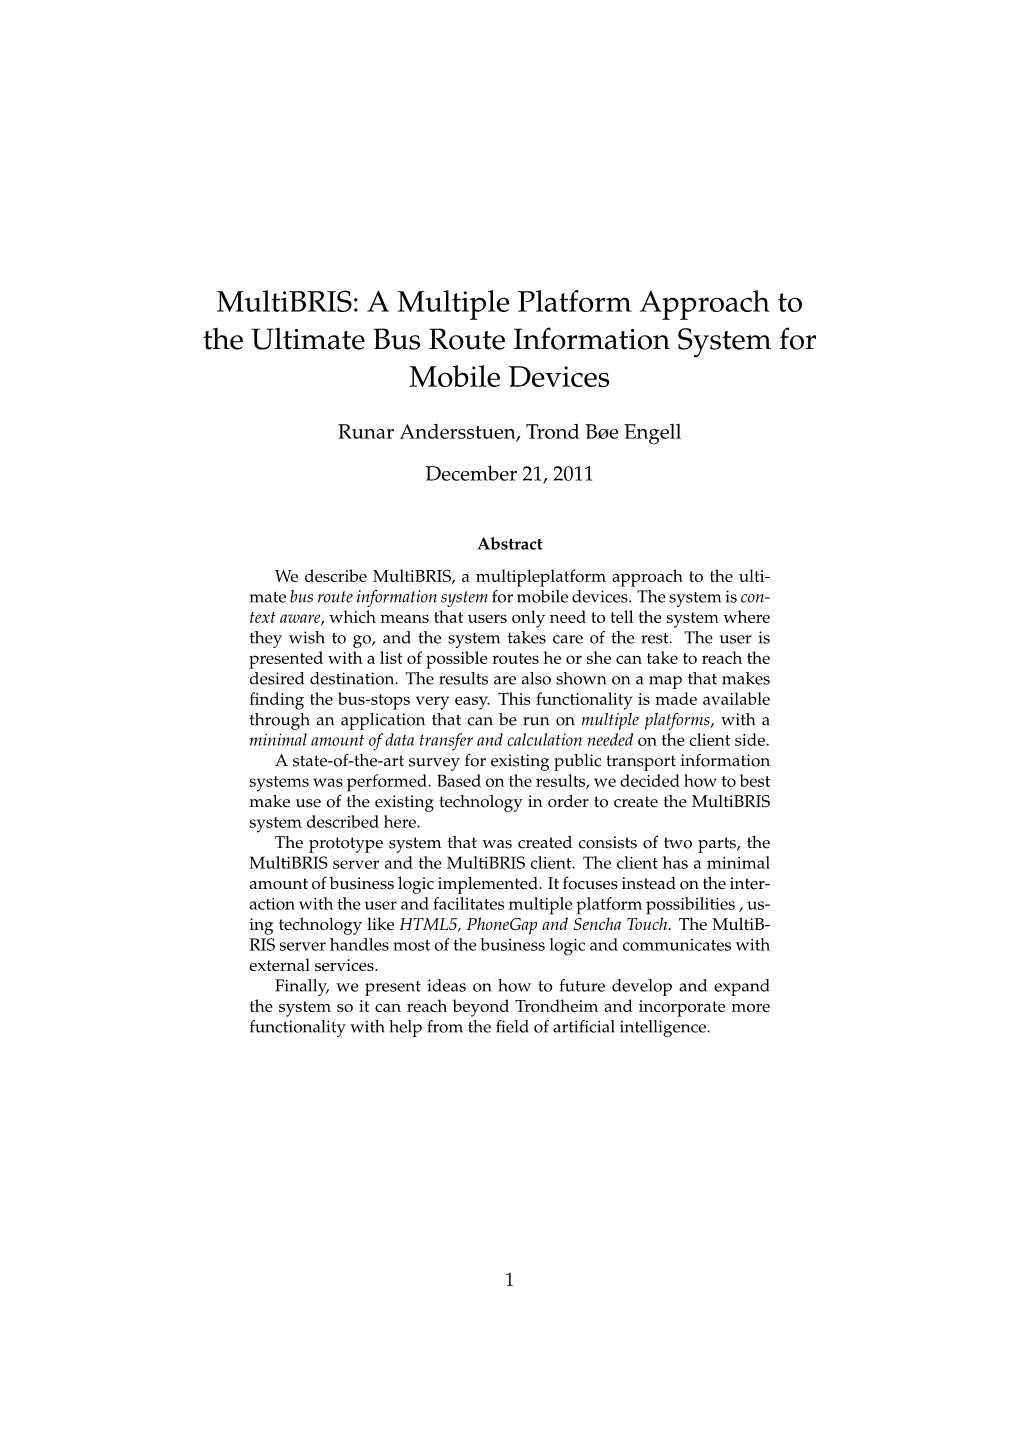 Multibris: a Multiple Platform Approach to the Ultimate Bus Route Information System for Mobile Devices